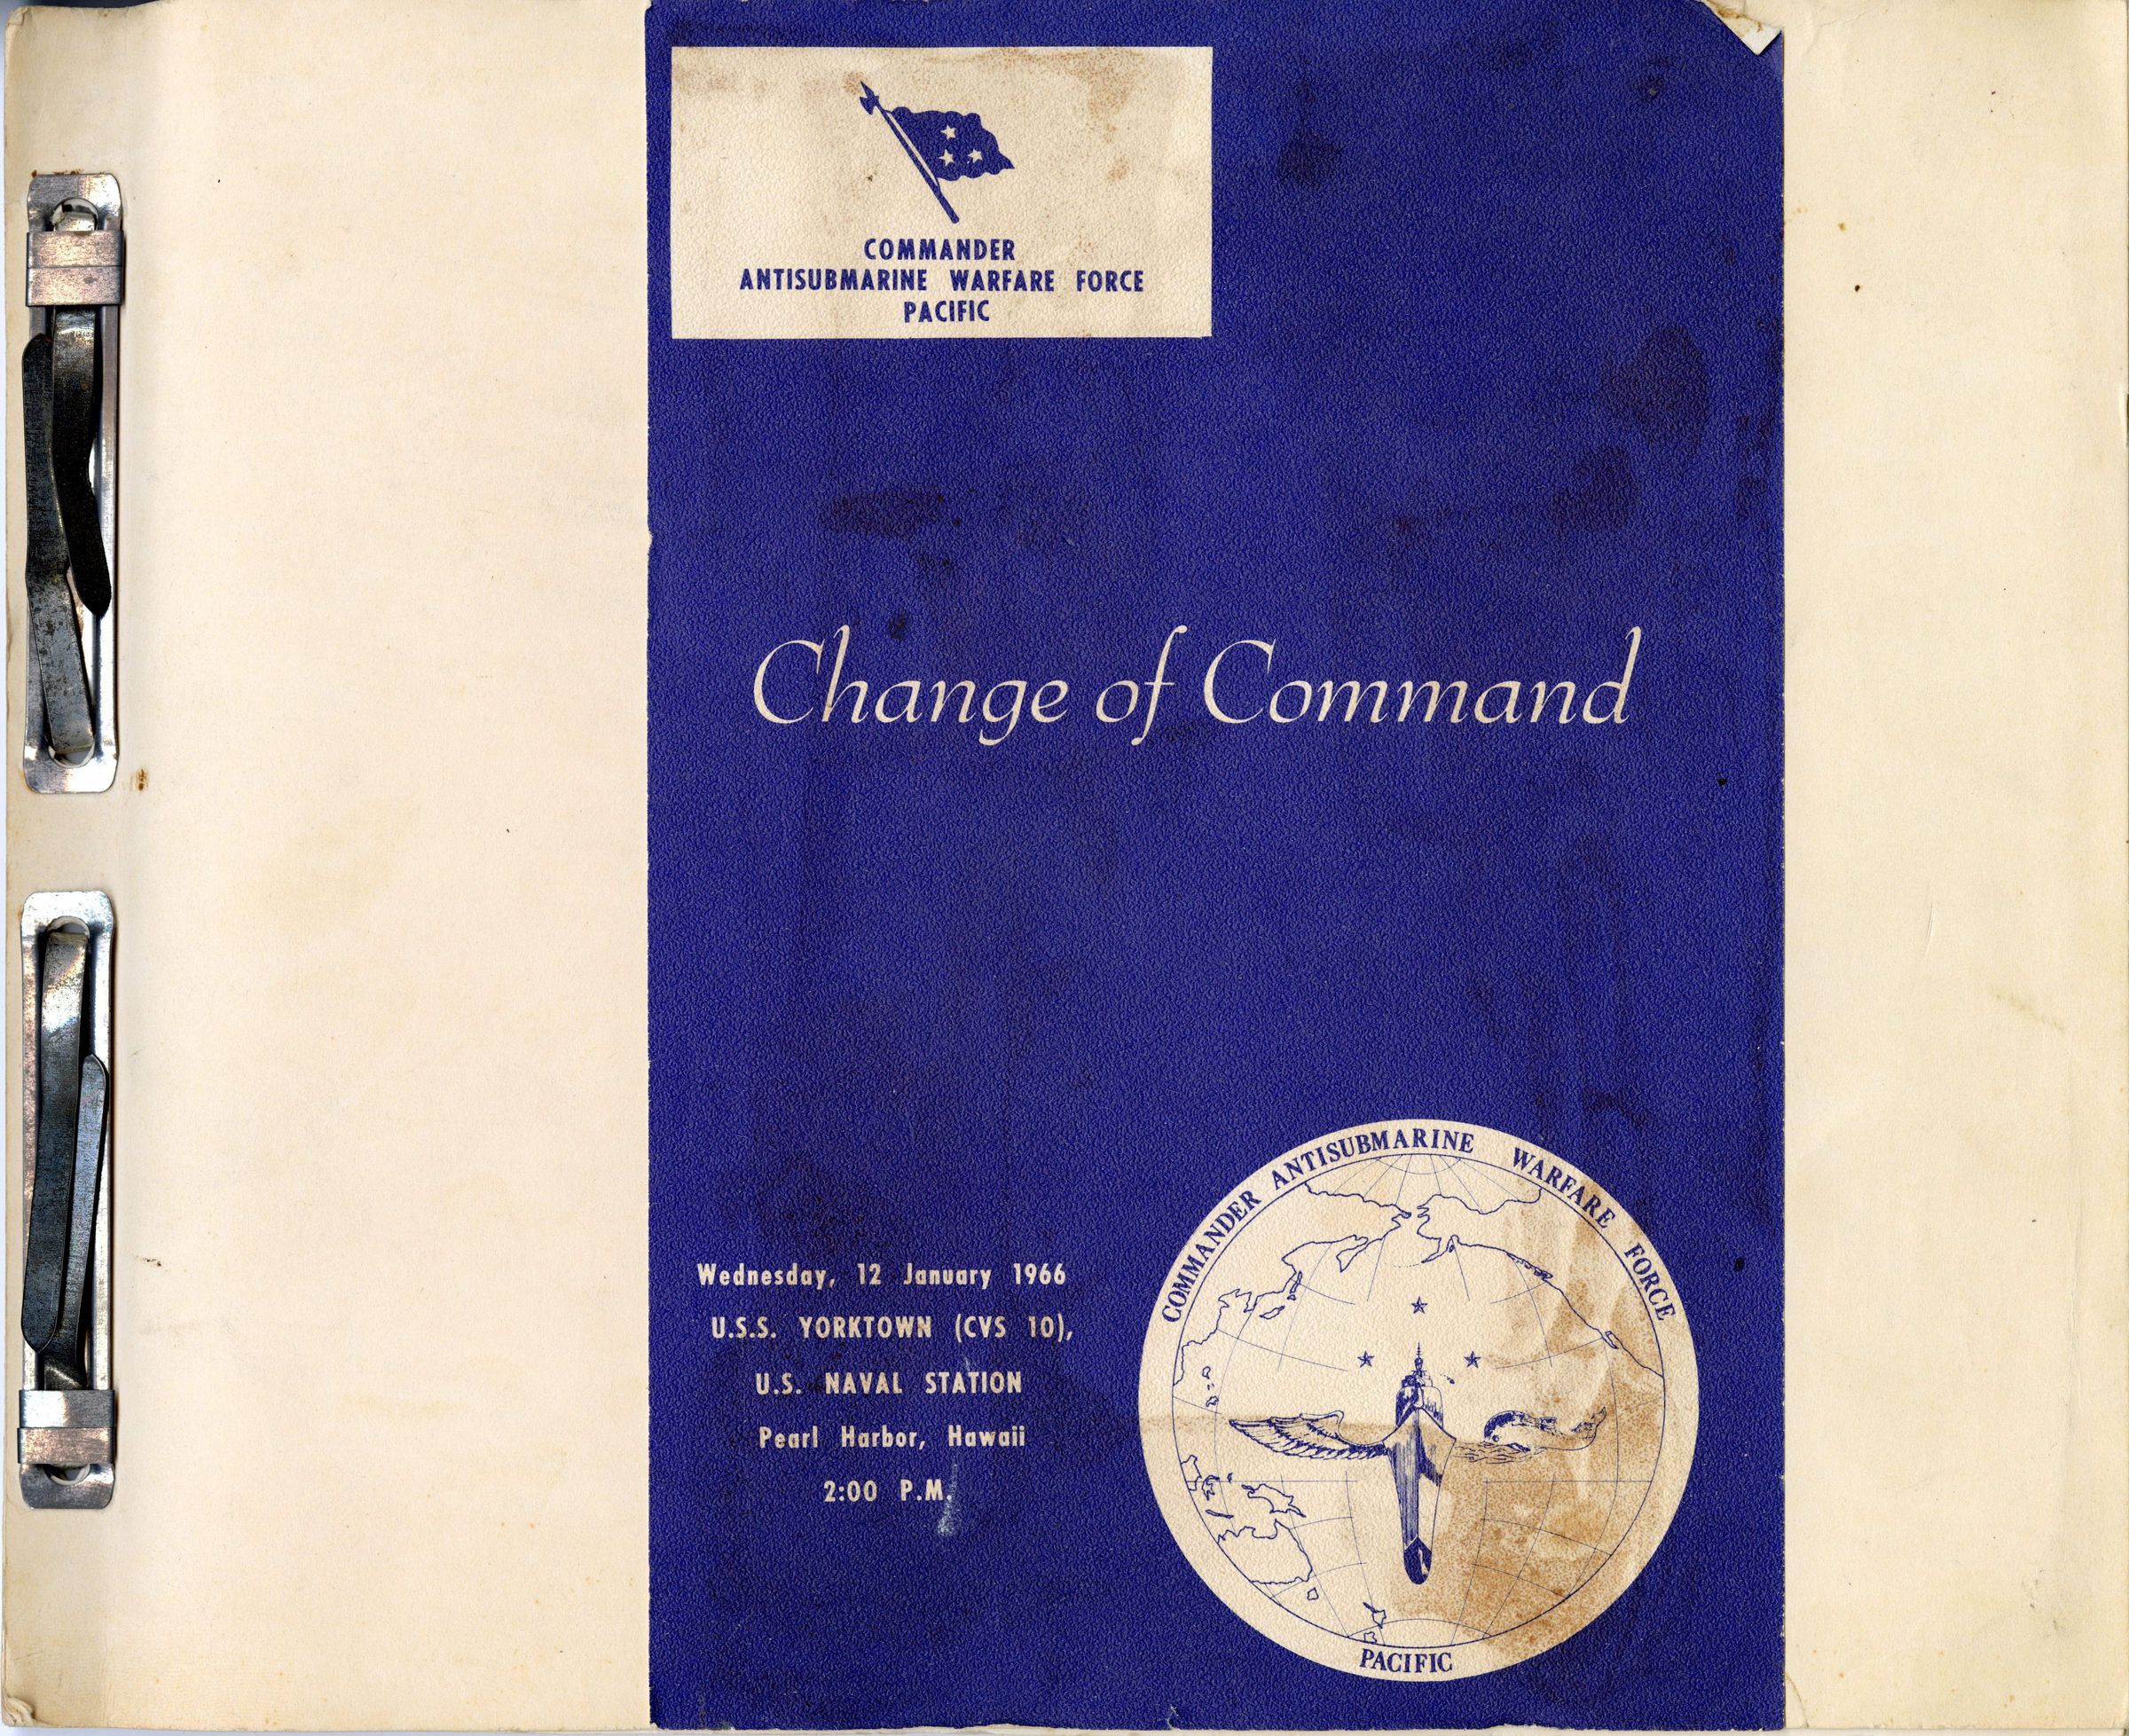 Primary Image of The Change of Command Scrapbook of Captain James Cain